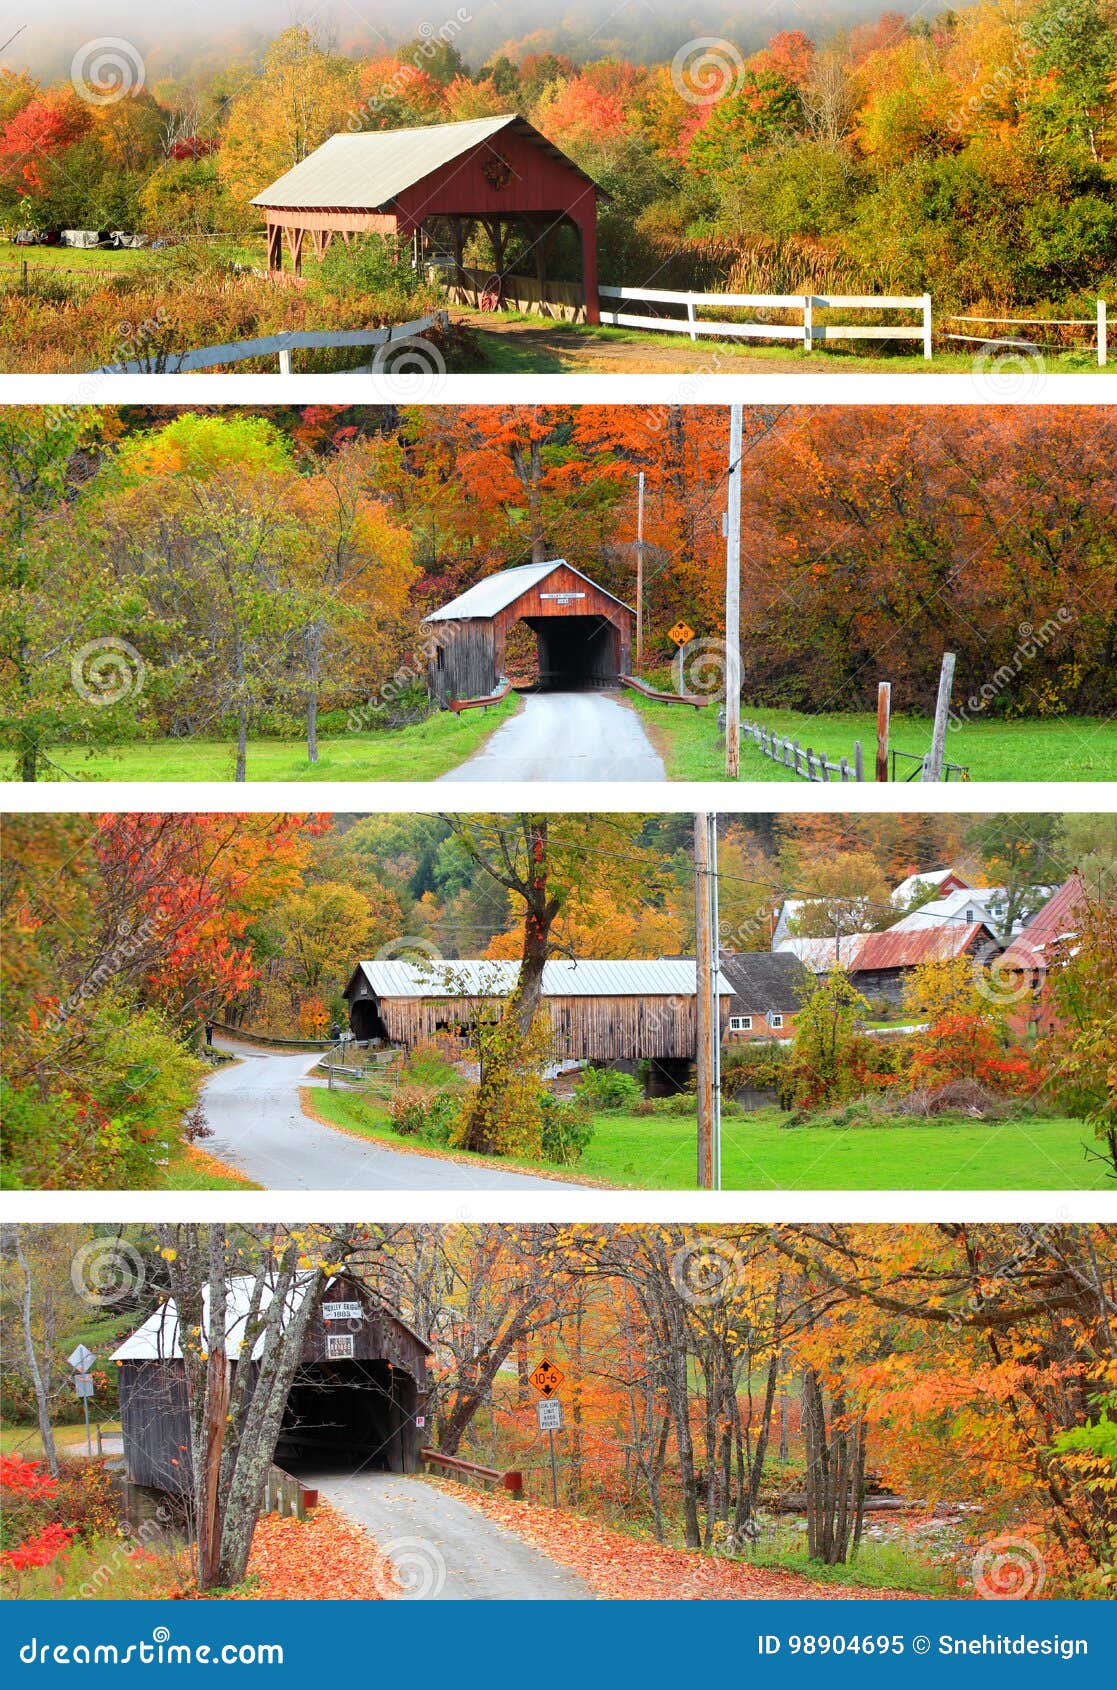 collage of new england covered bridges